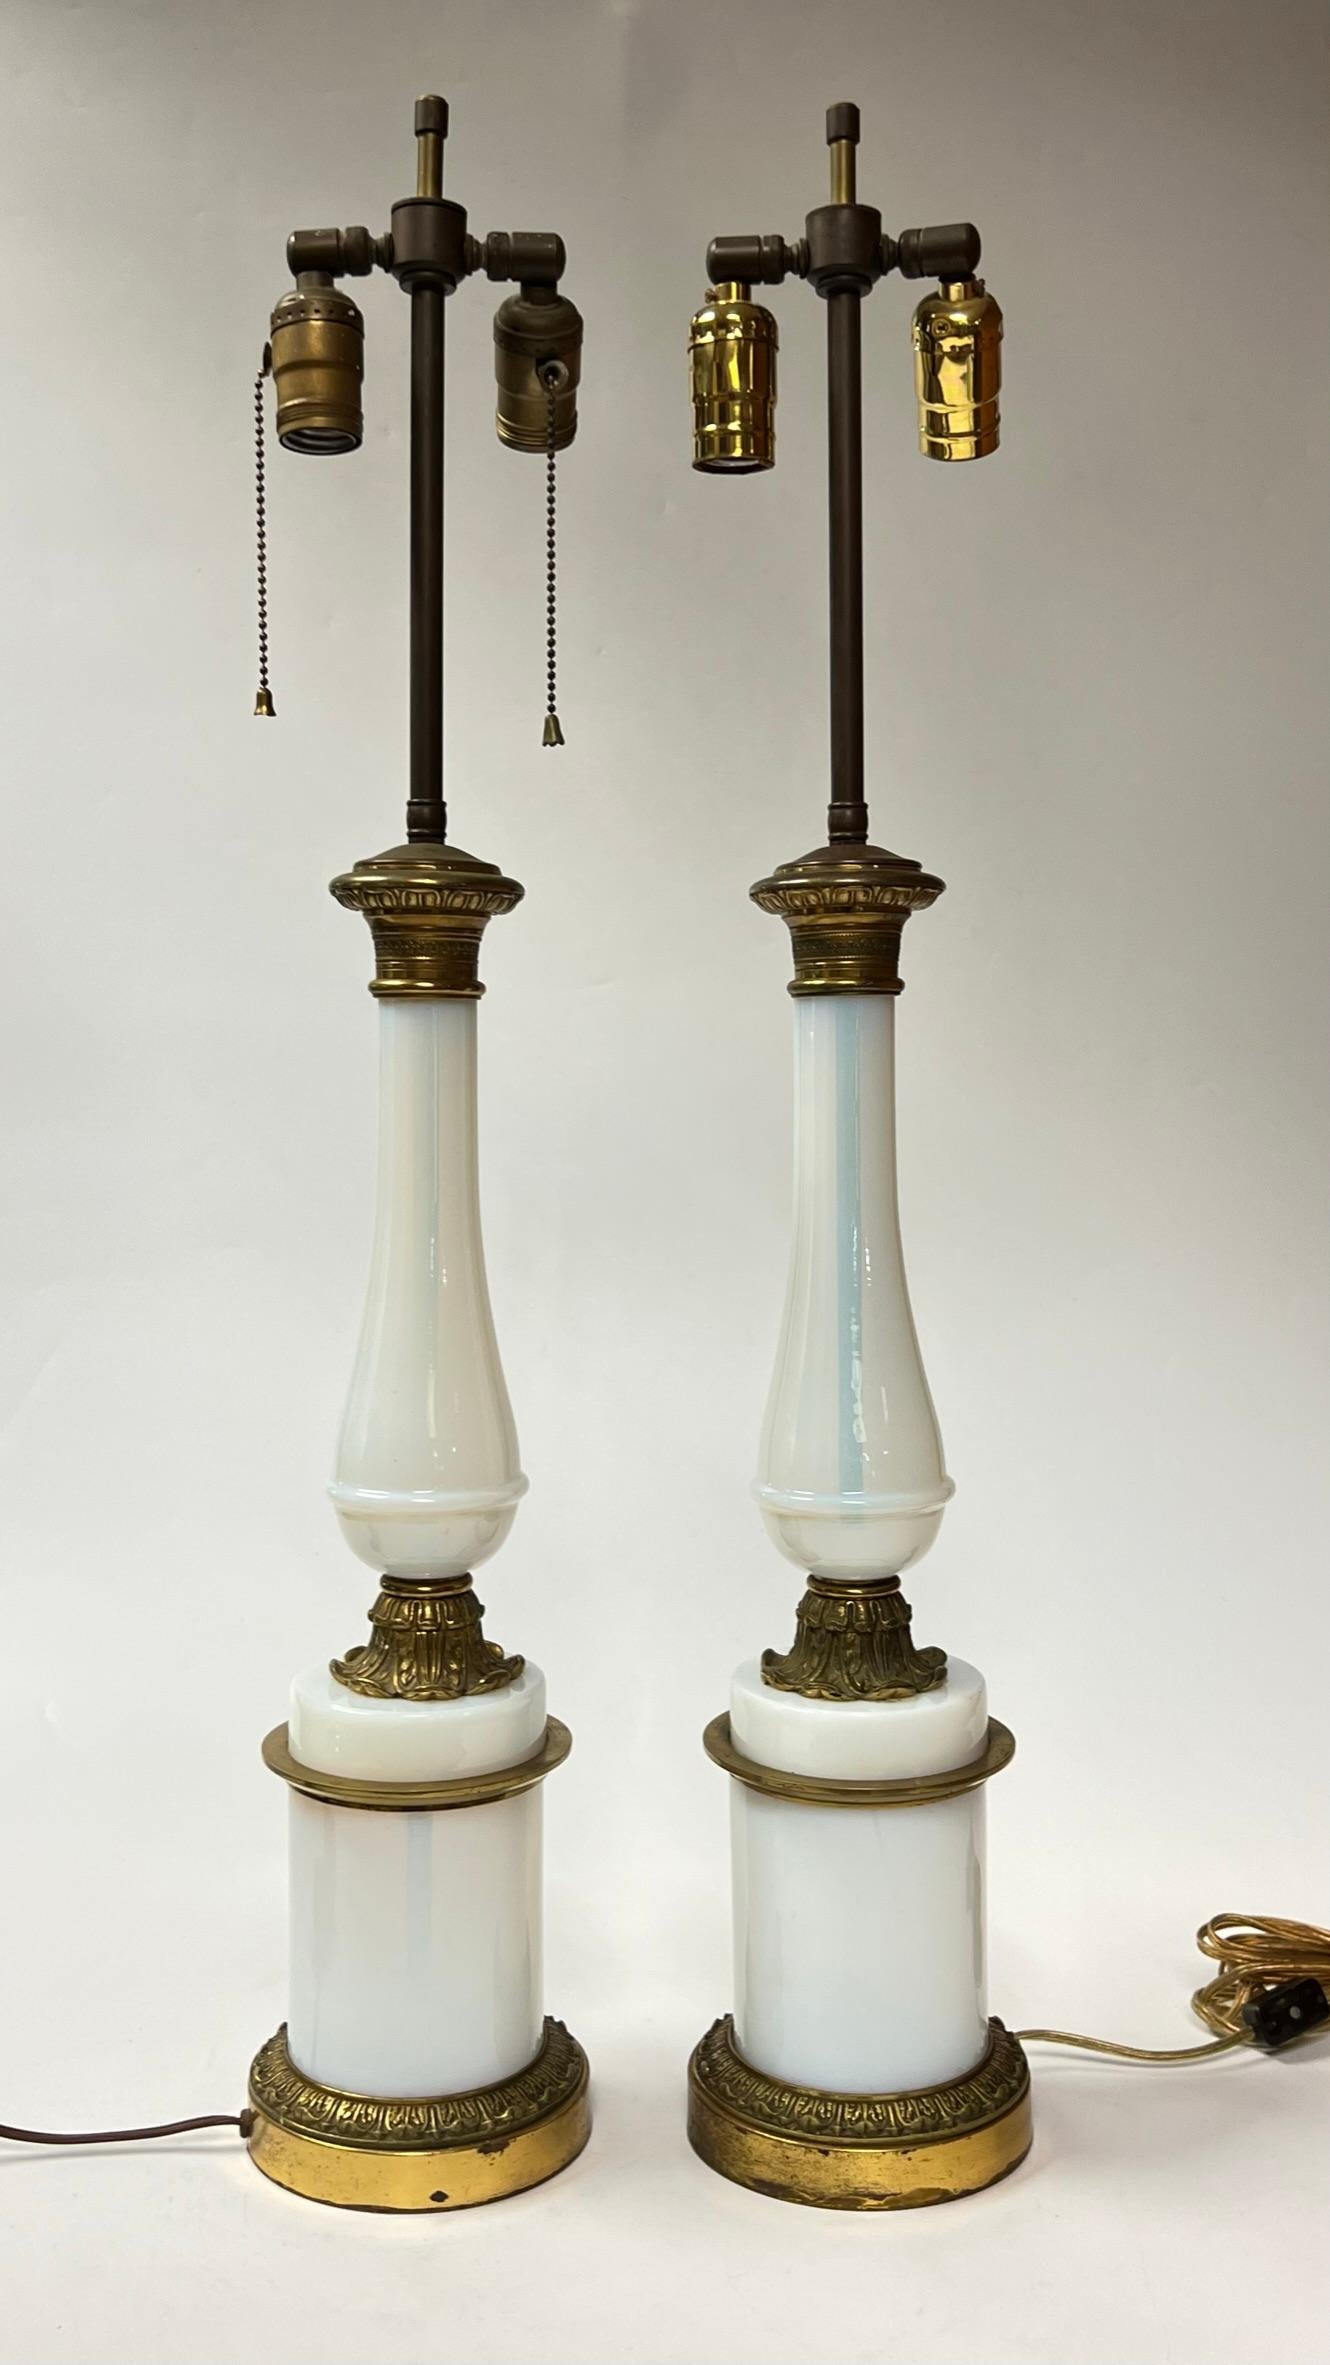 Pair of antique lamps in the neoclassical style with gilt brass and bronze mounts and standards crafted from blown opaline glass.  